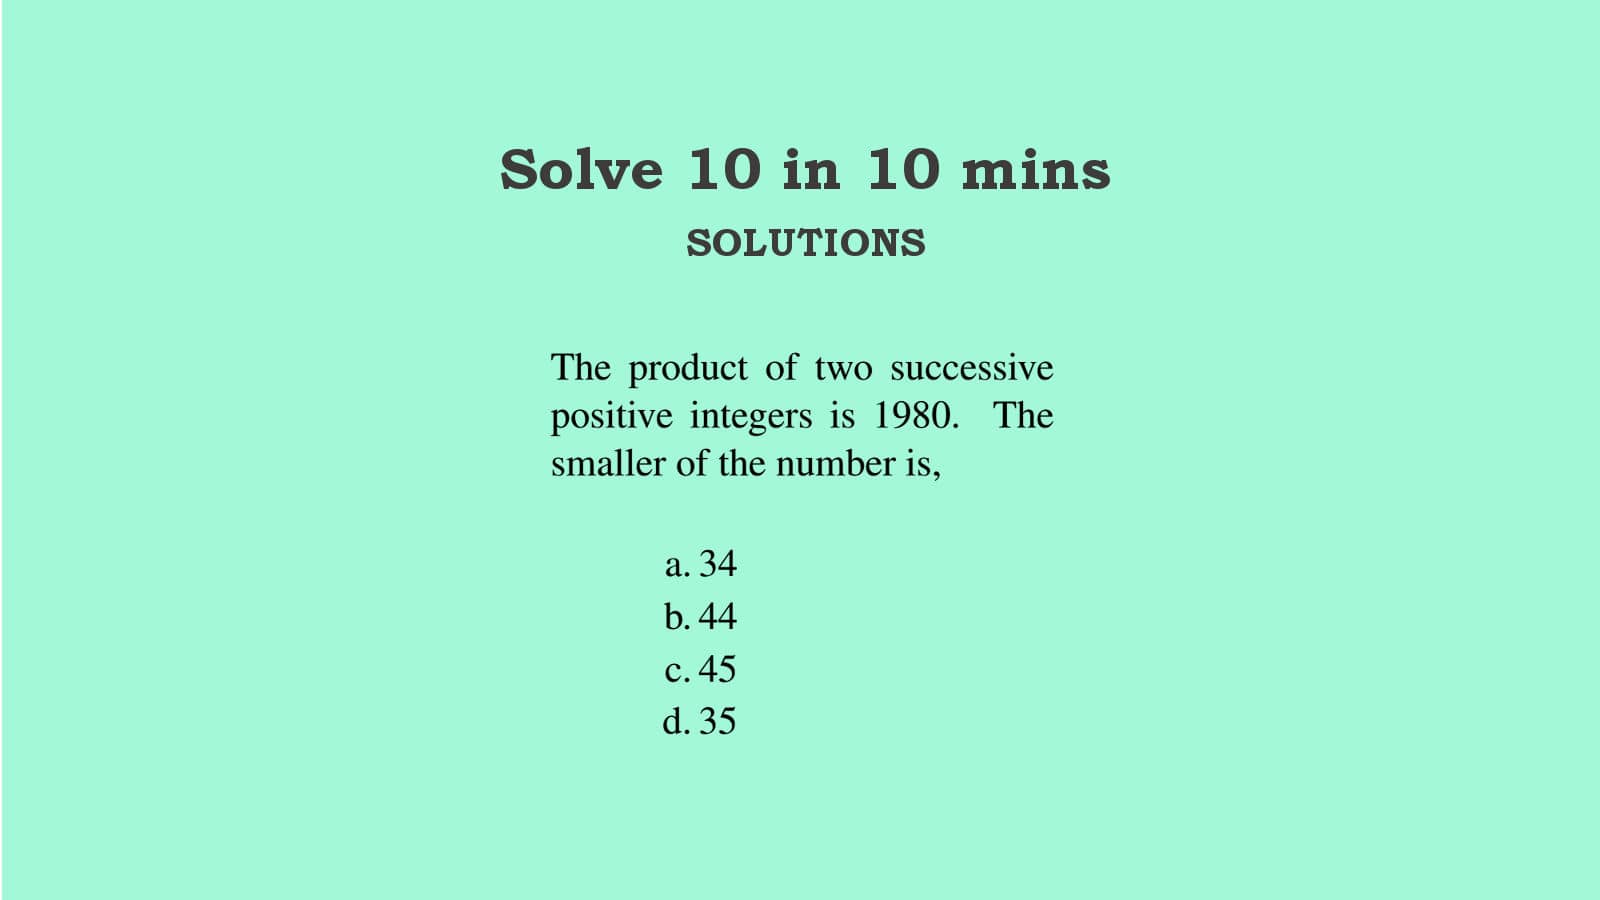 4th Set of WBCS Arithmetic Practice Problems Solved